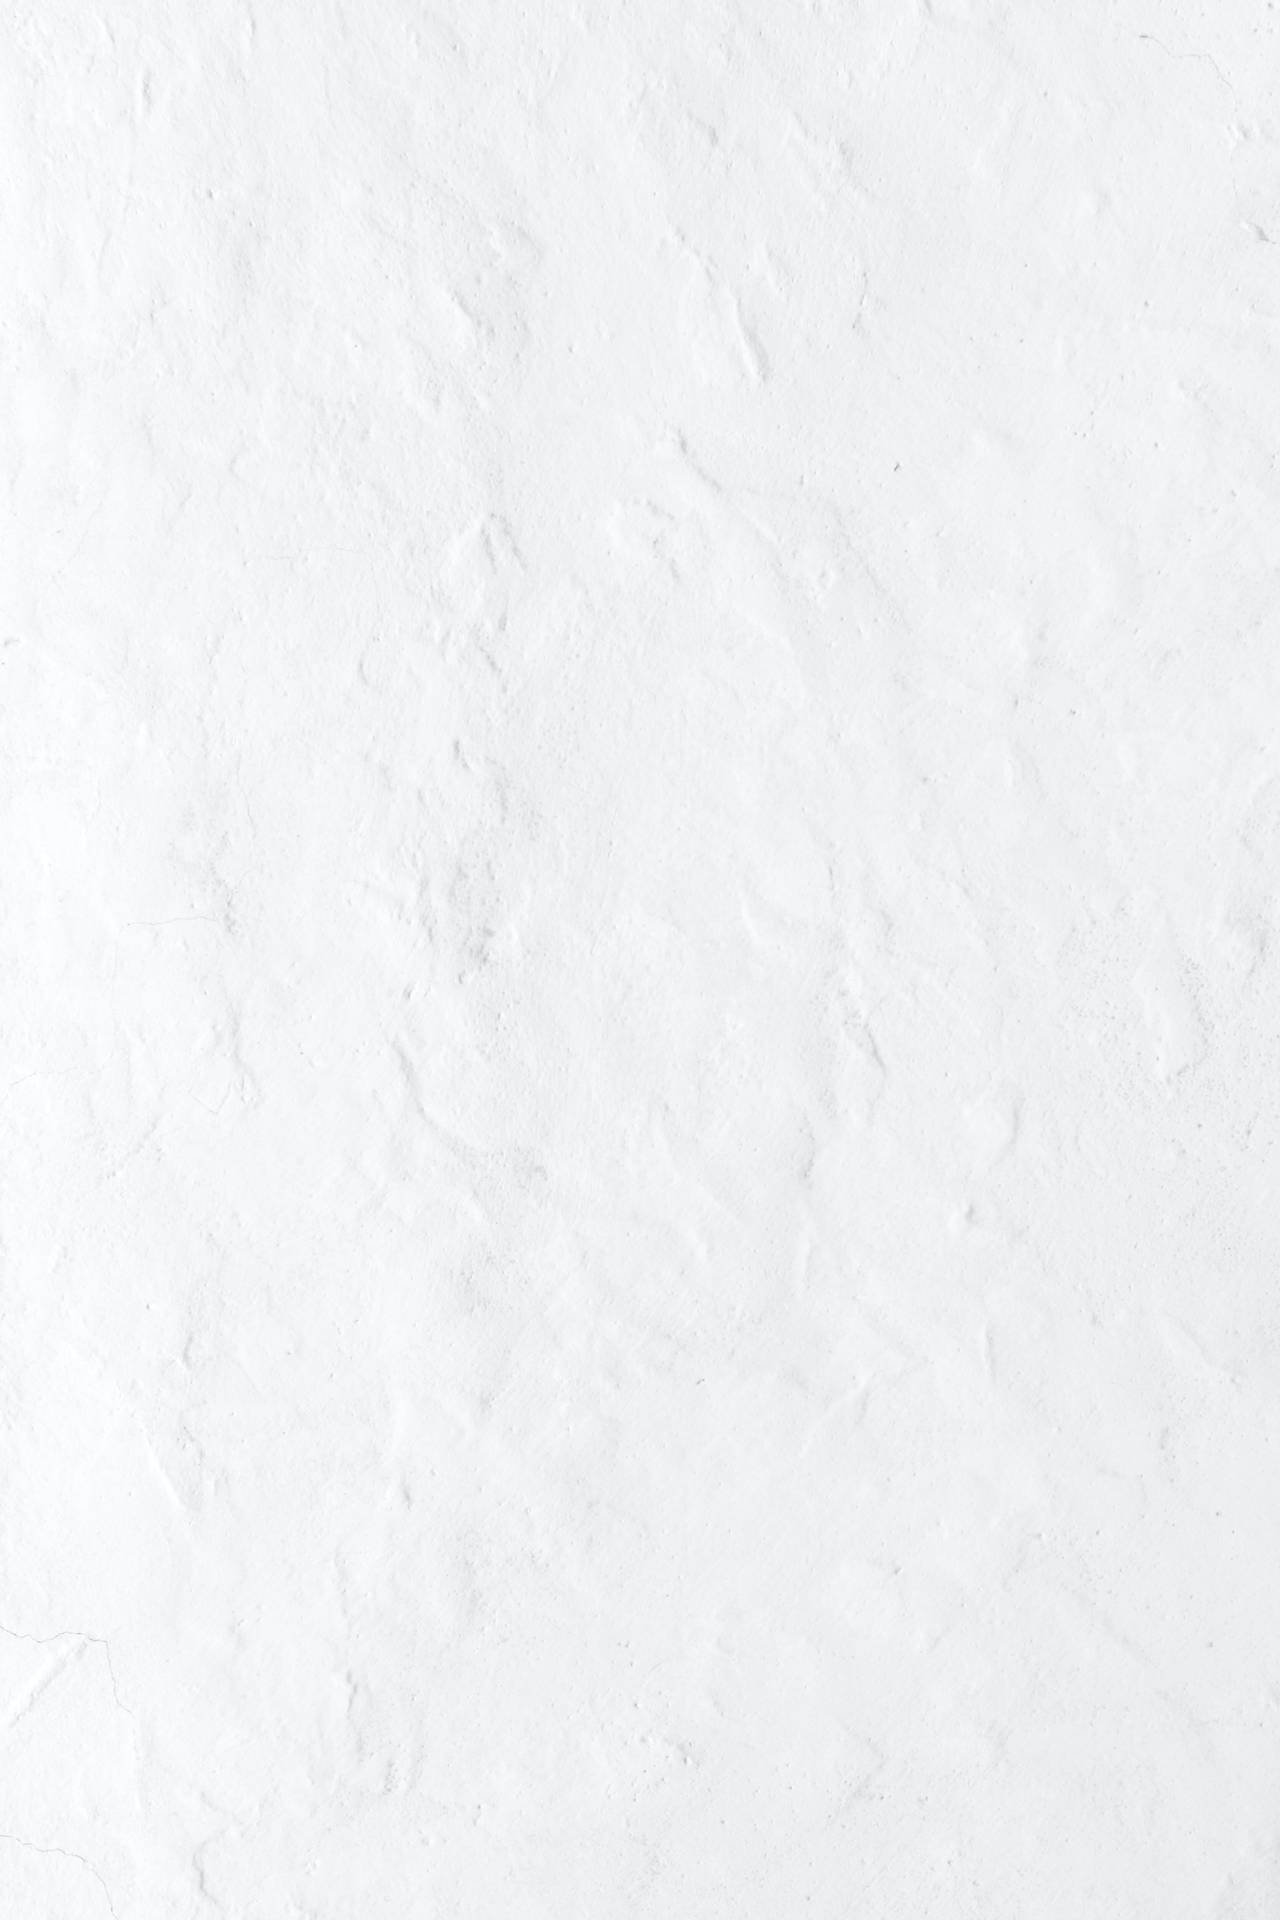 Textured Pure White Wall Background